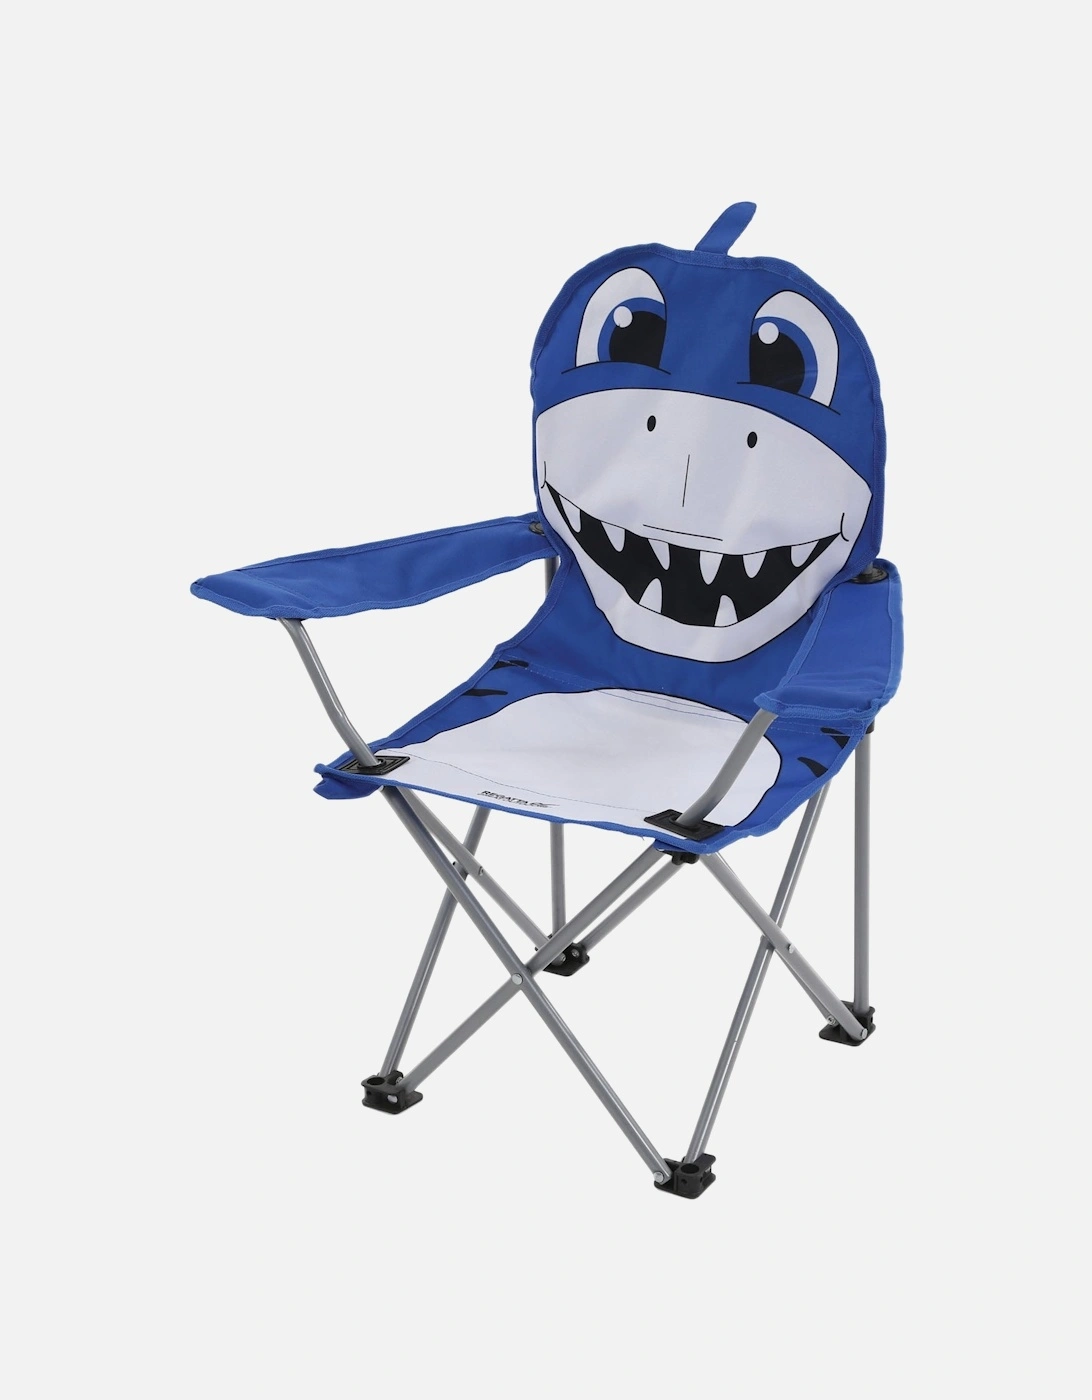 Kids Animal Outdoor Fold Up Camping Chair